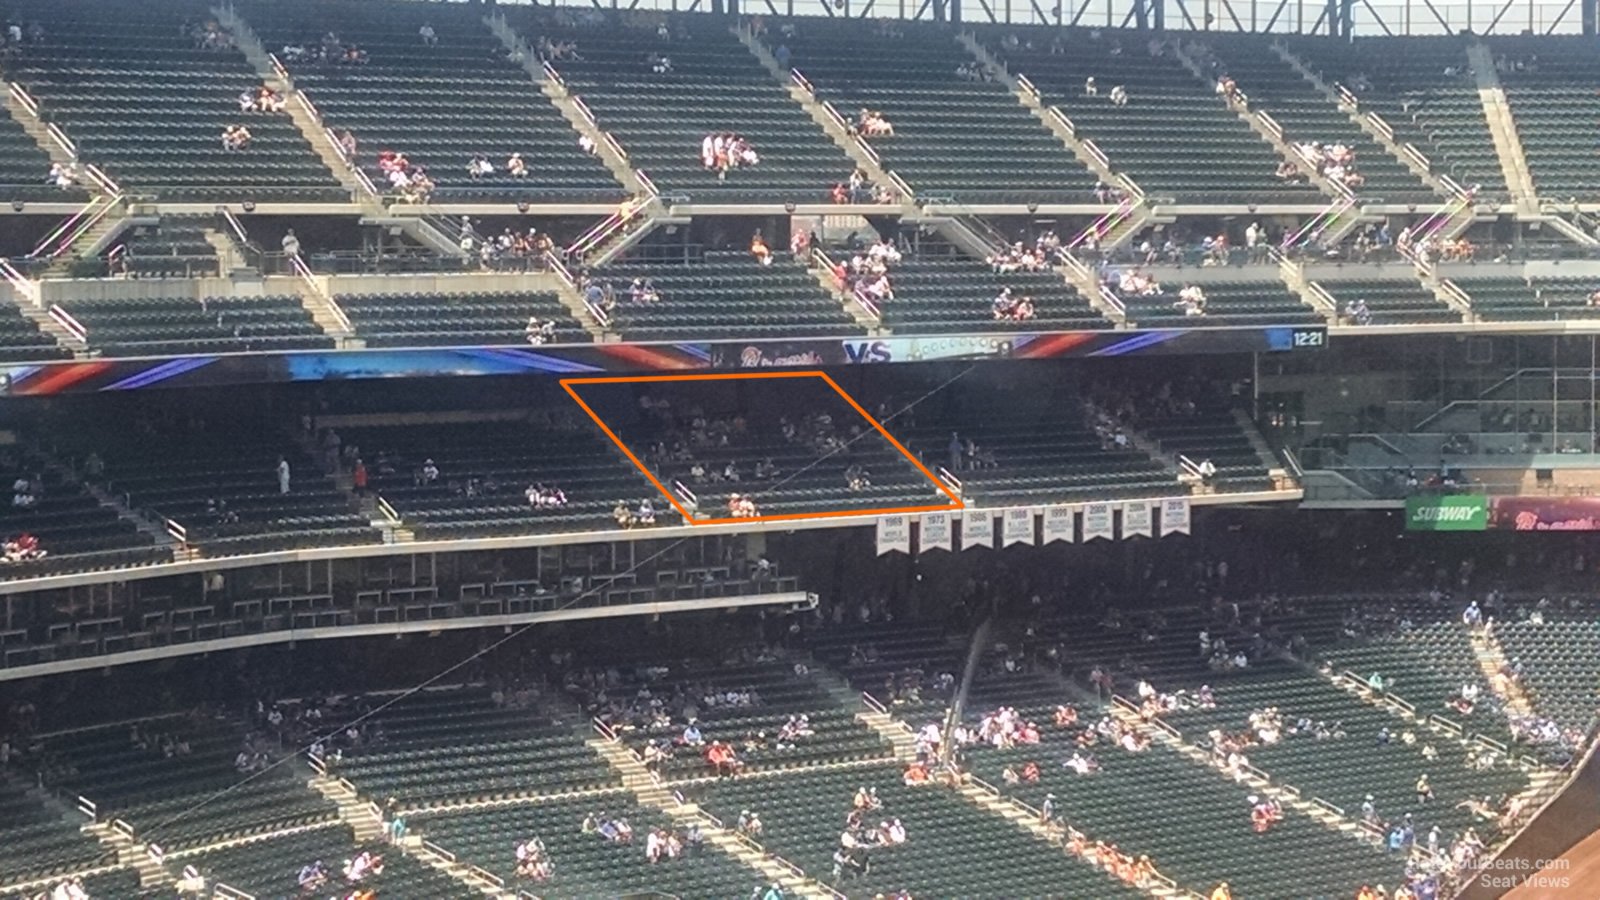 view of section 331 citi field